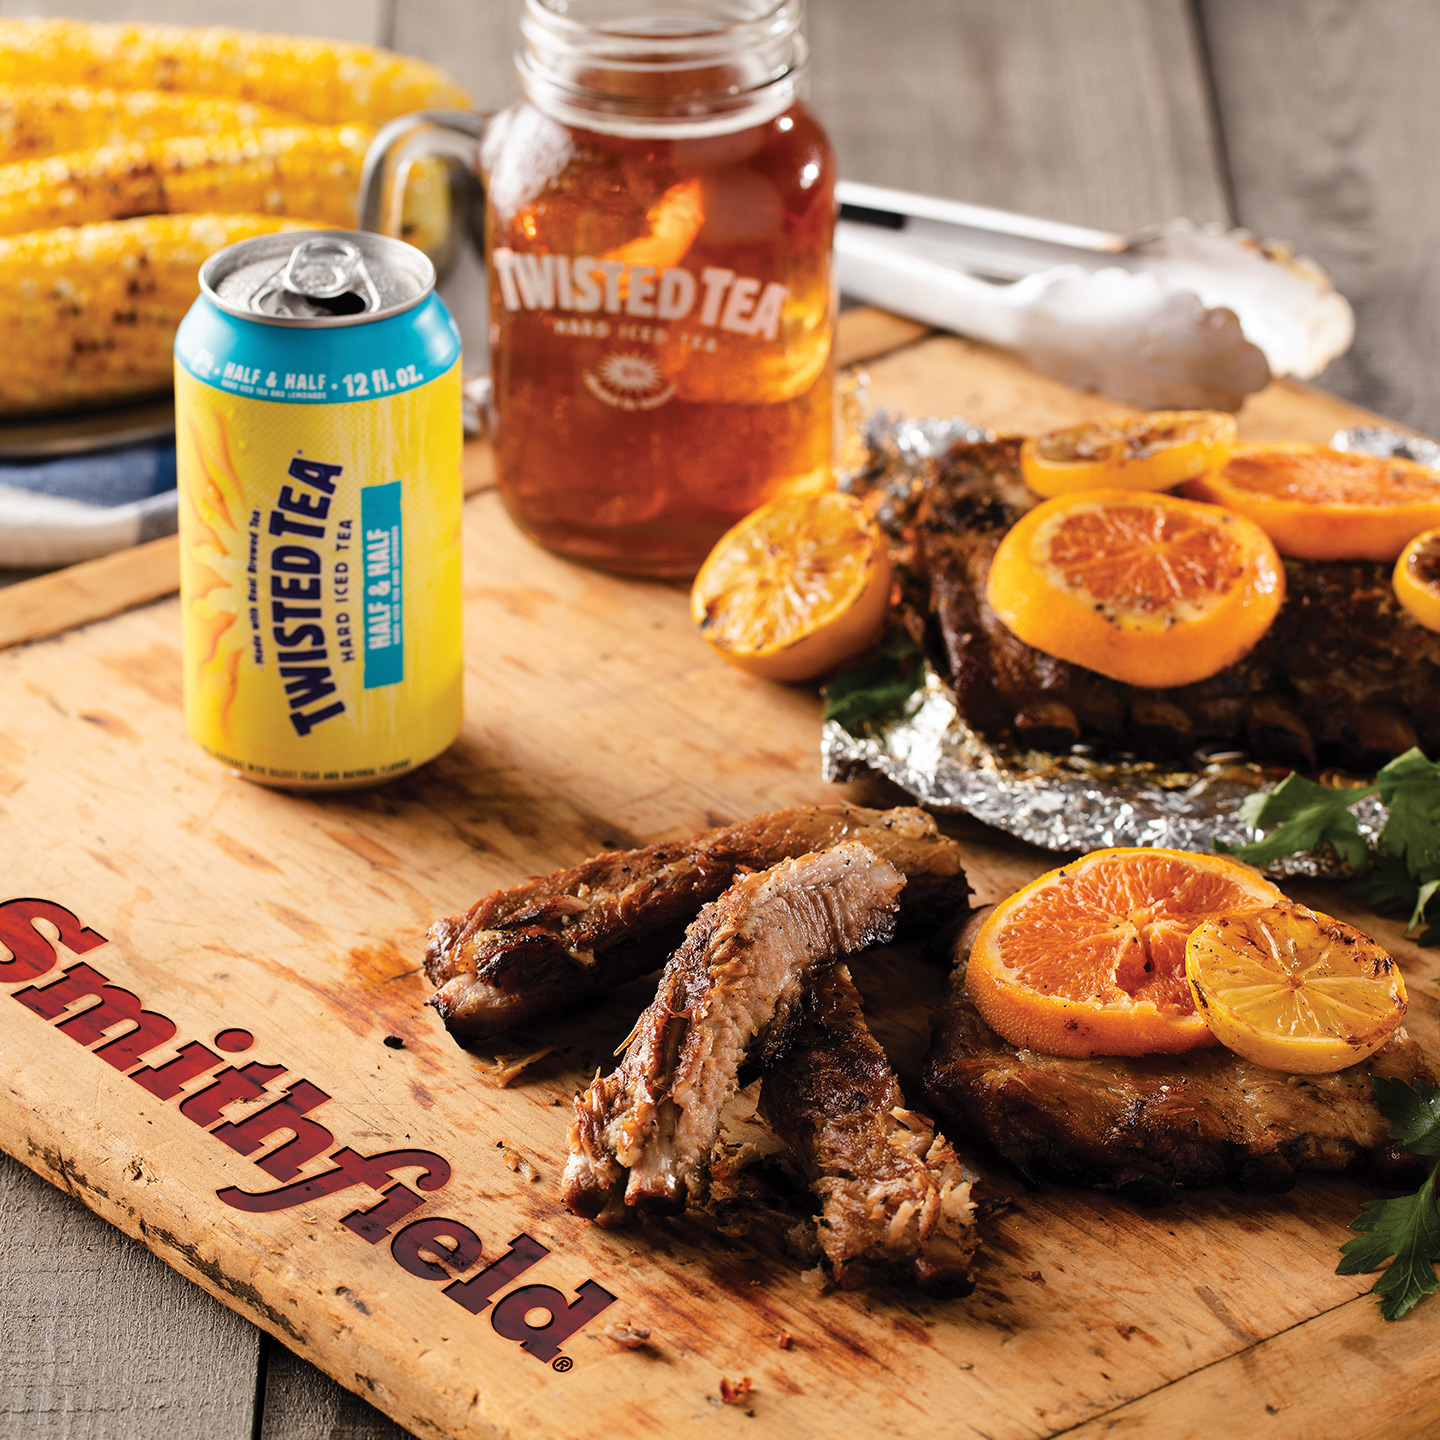 Twisted Tea and Citrus Ribs